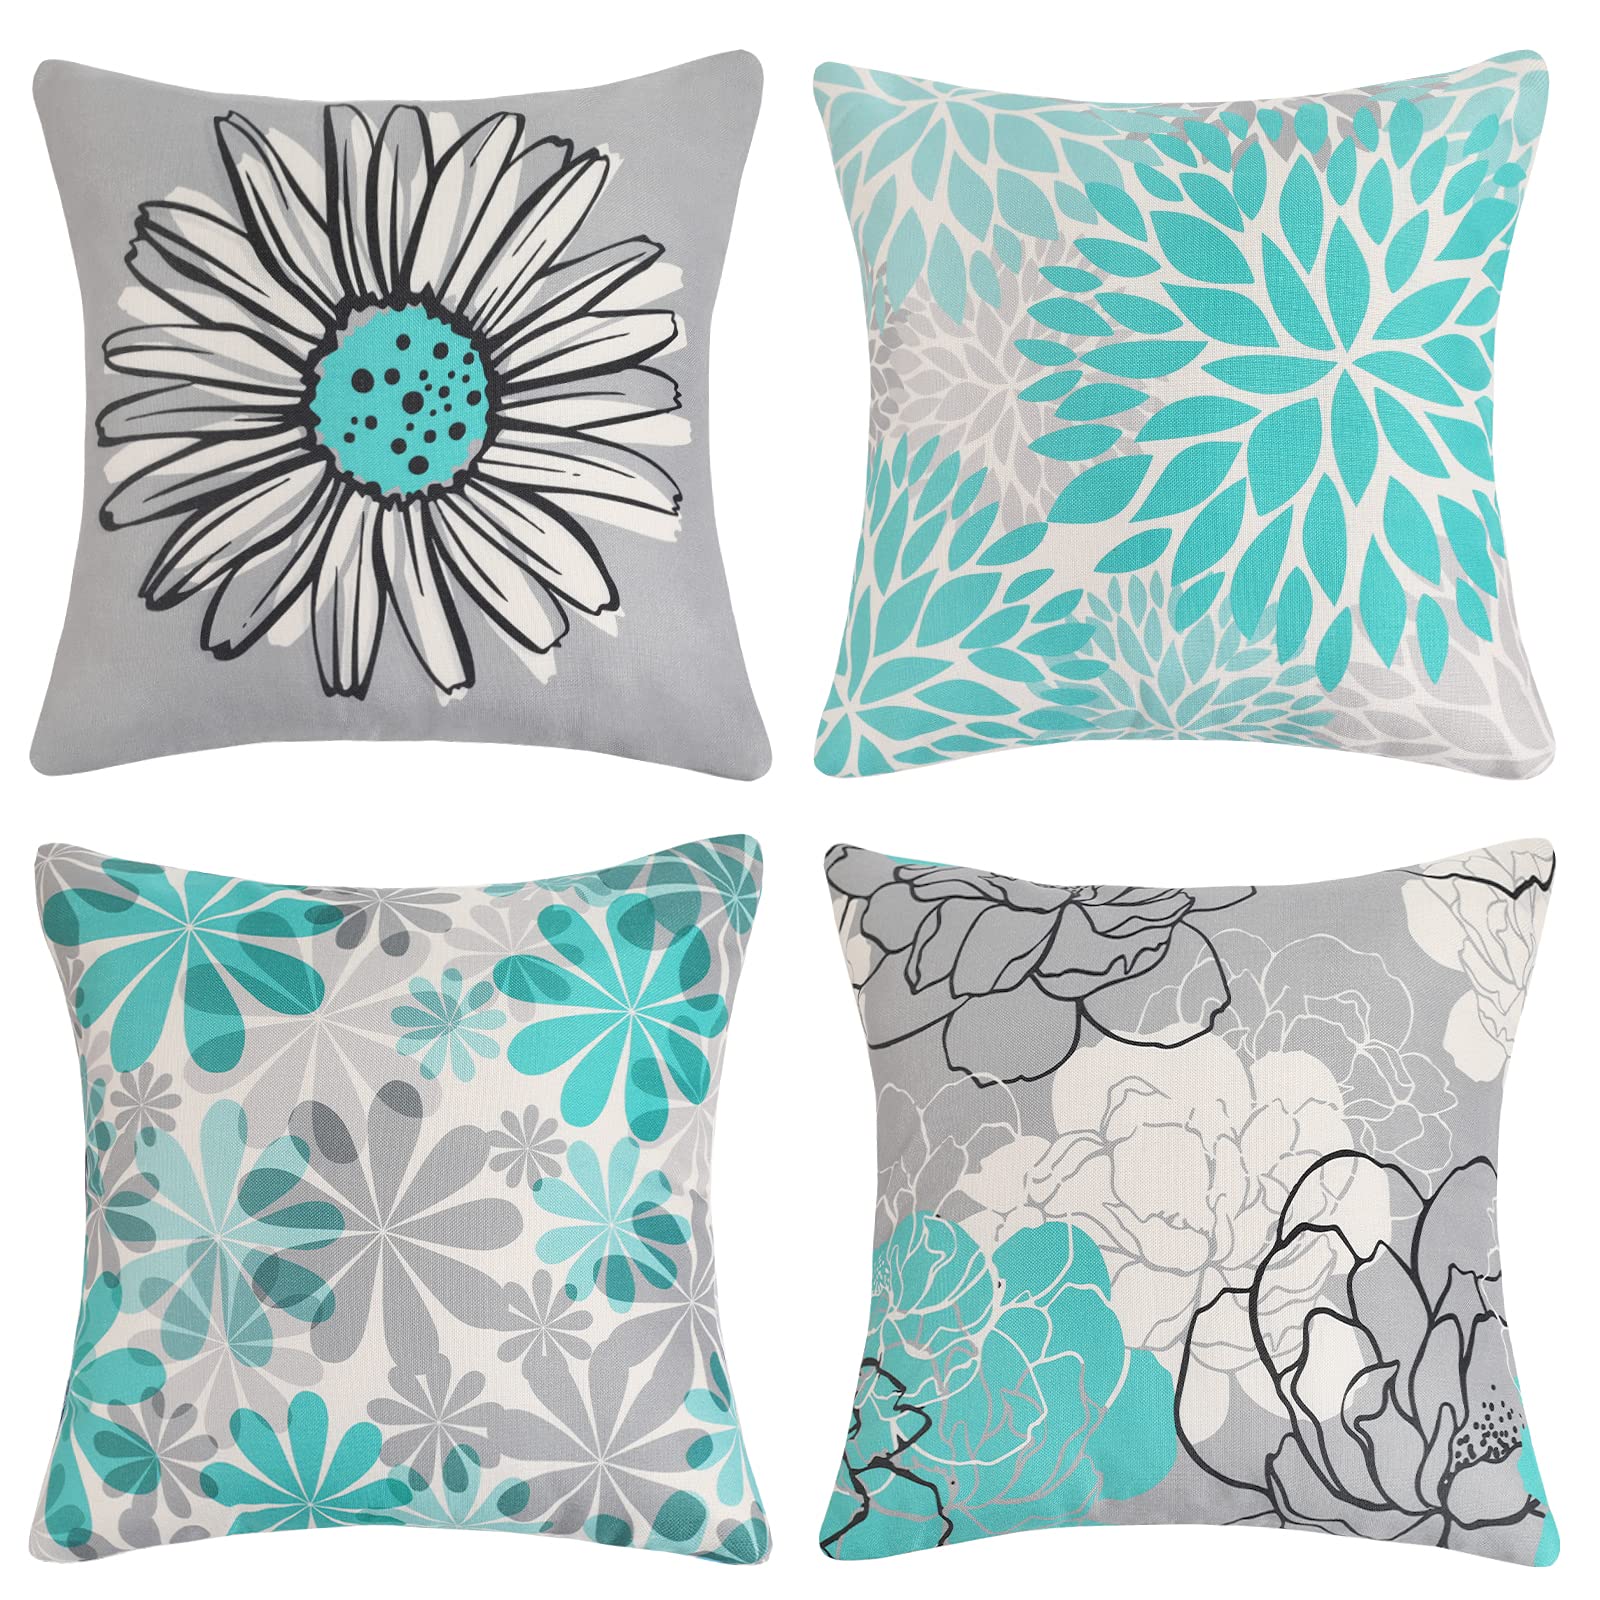 Decorative Cushion Covers 18 x 18 inches Turquoise and Grey Throw Pillow Covers Modern Daisy Flowers Linen Square Pillow Cases for Sofa Couch Chair Outdoor Patio Home Decor Pillowcases Set of 4